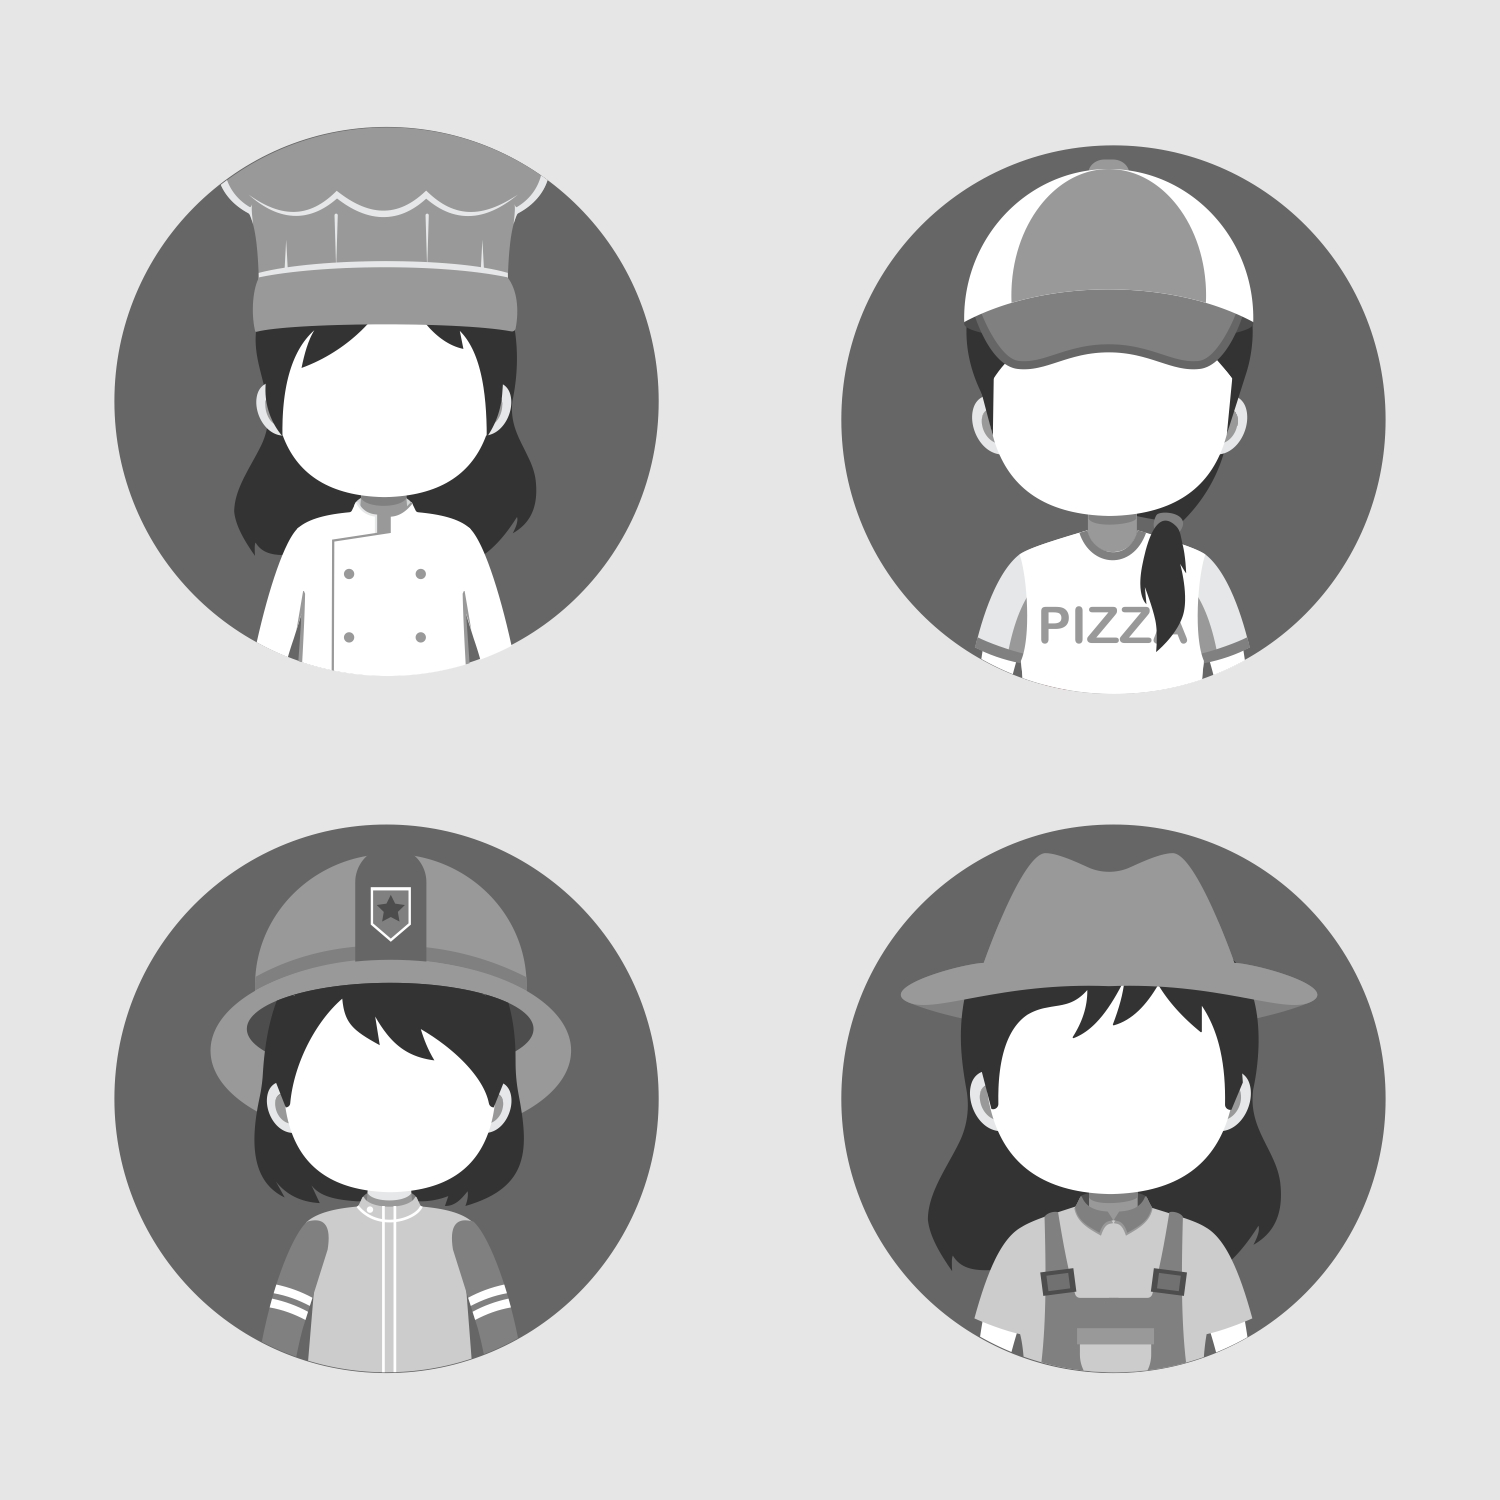 Free vector Great Variety Female Workers with No Expression Avatars design CDR file download for free